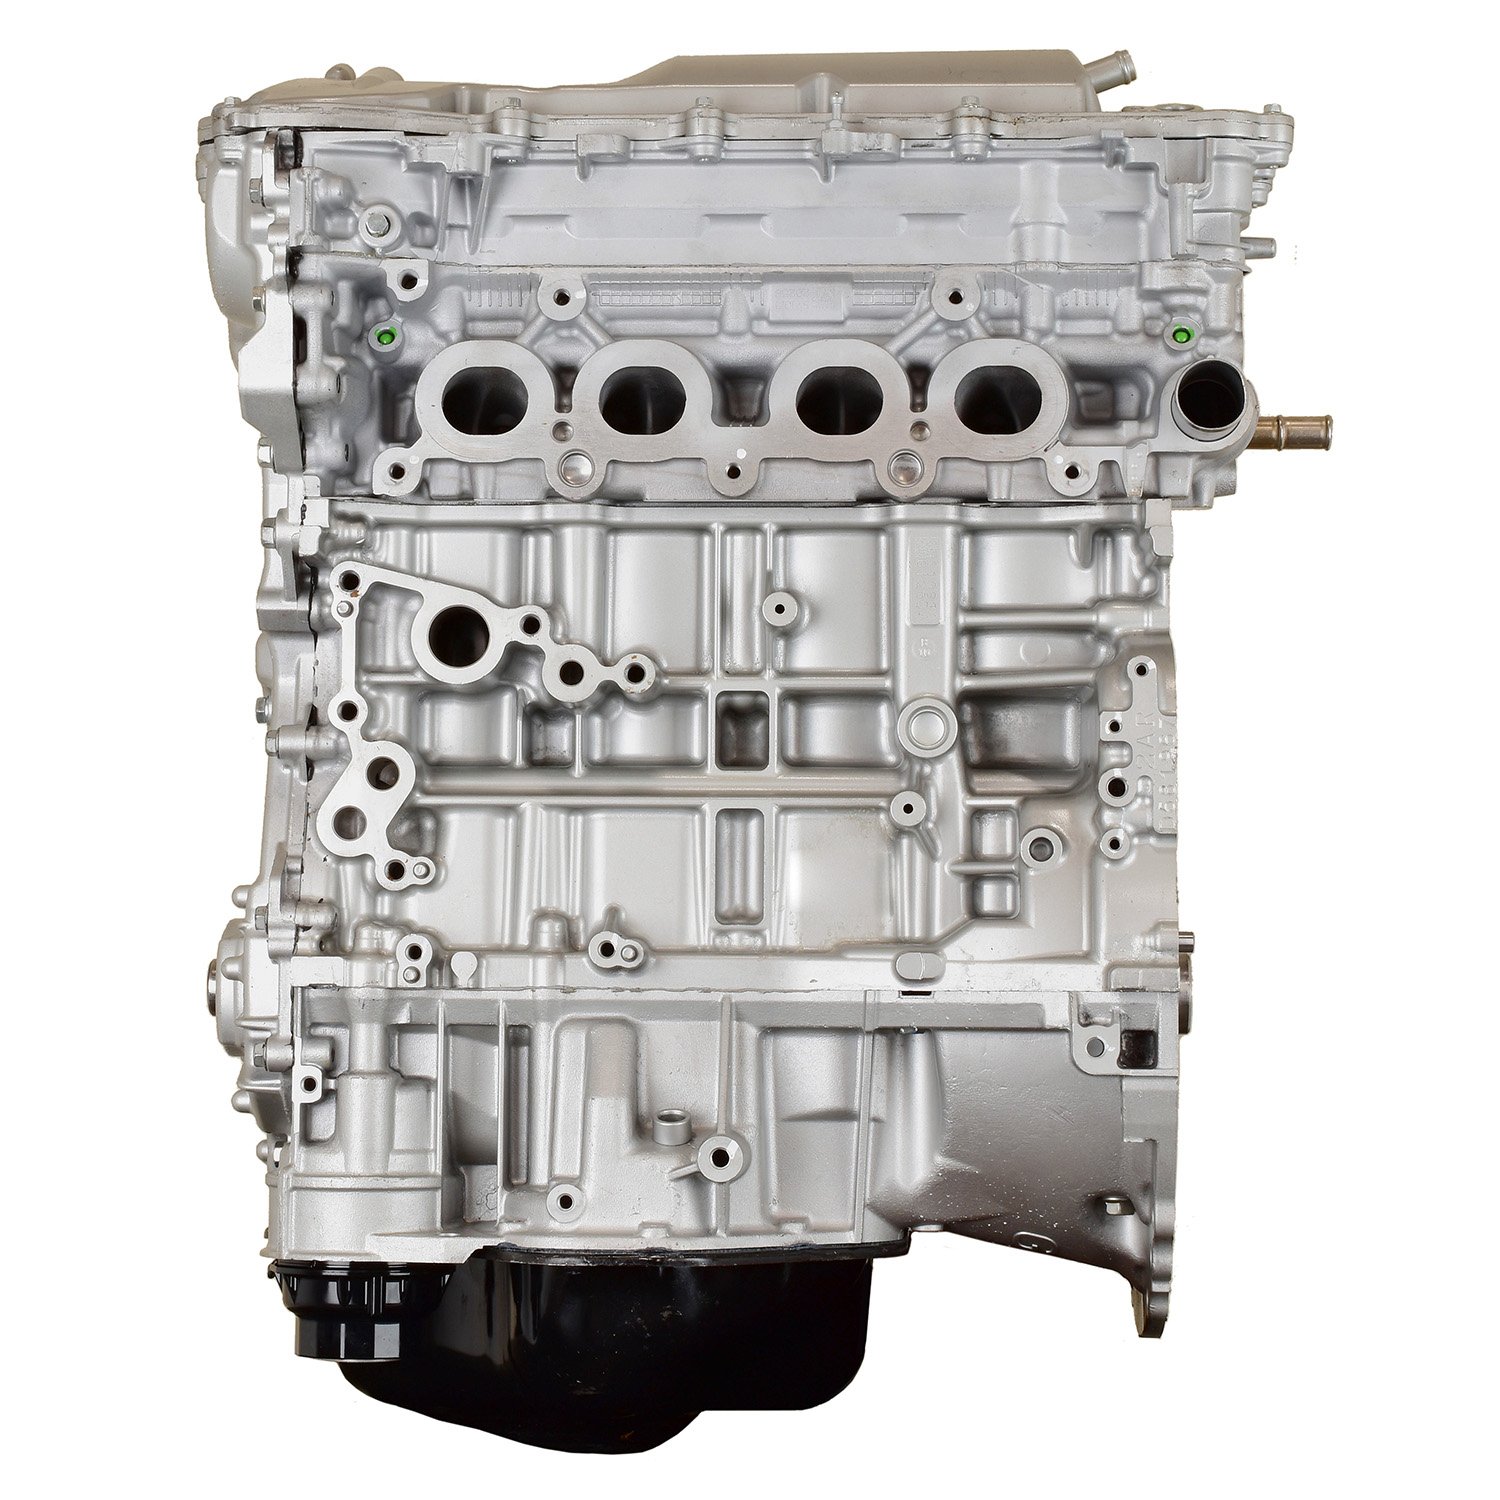 869B Remanufactured Crate Engine for 2010-2016 Toyota 2.5L